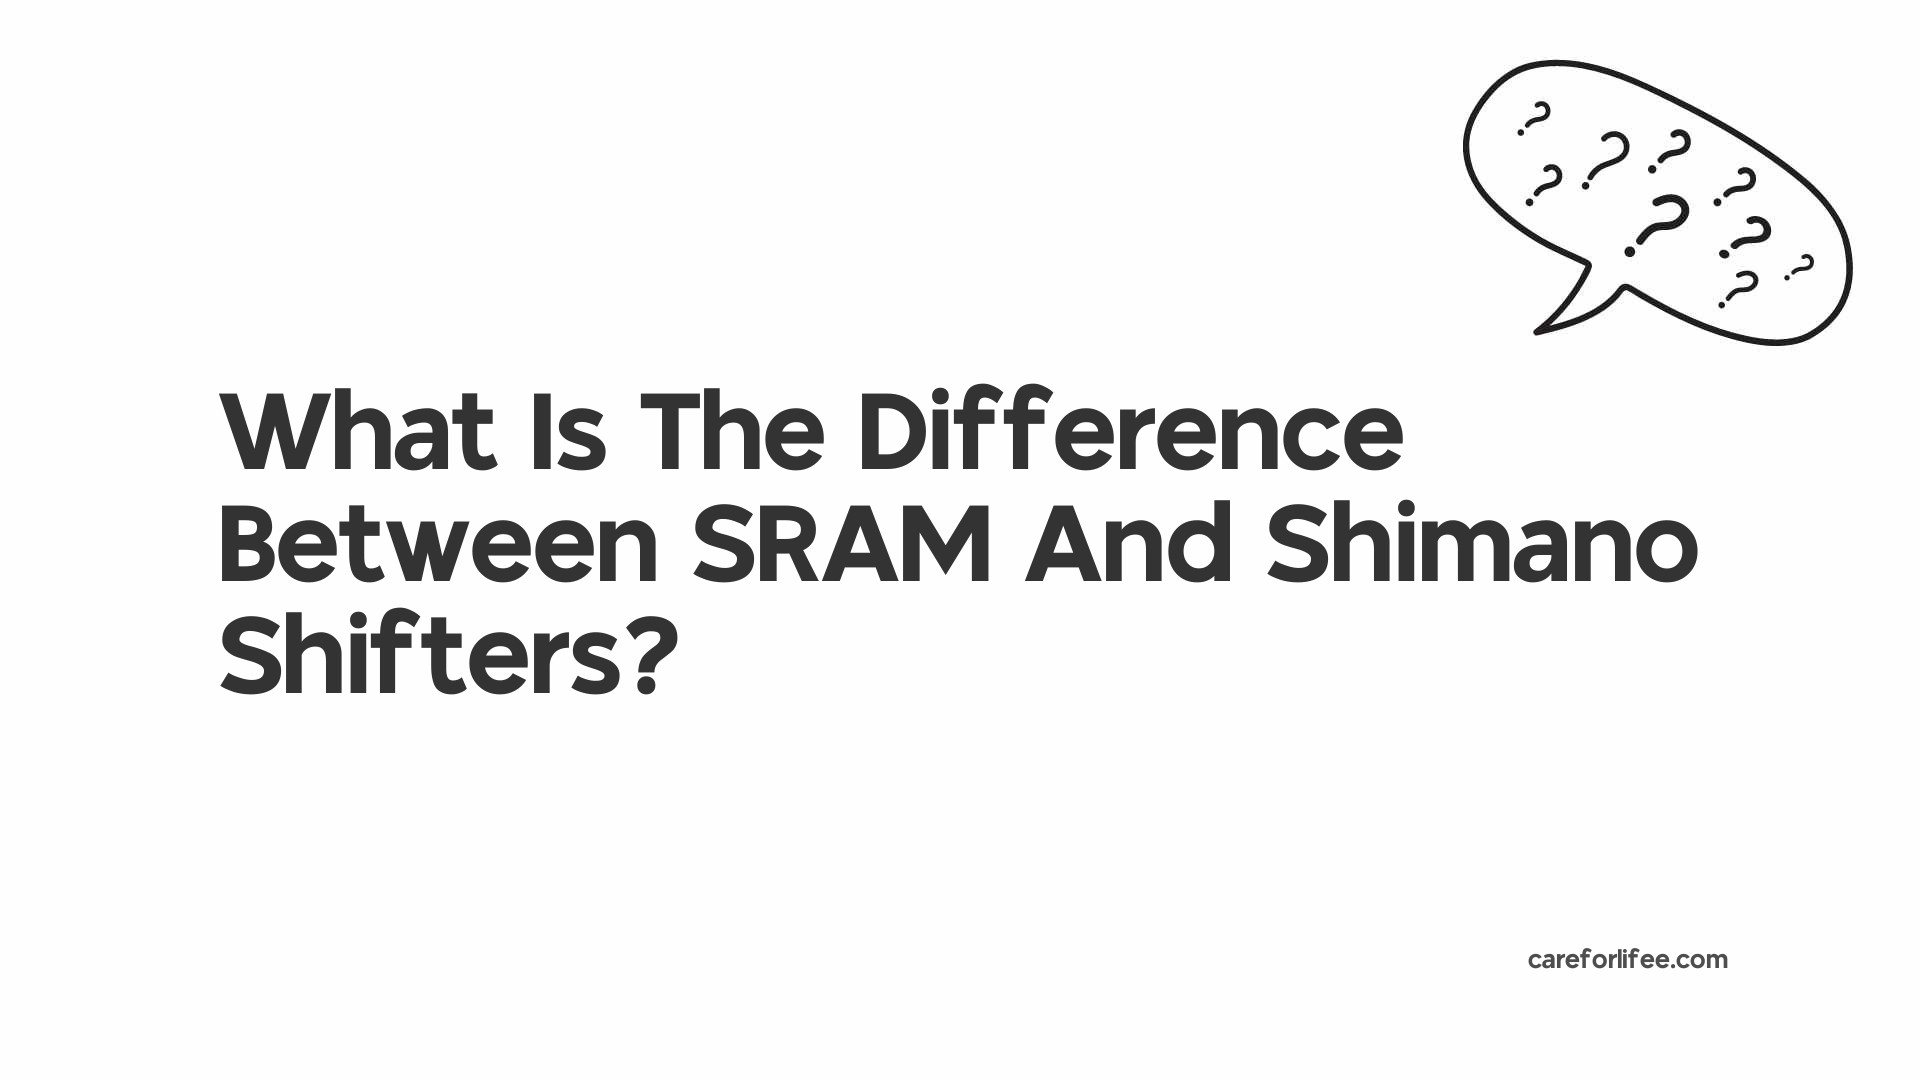 What Is The Difference Between SRAM And Shimano Shifters?